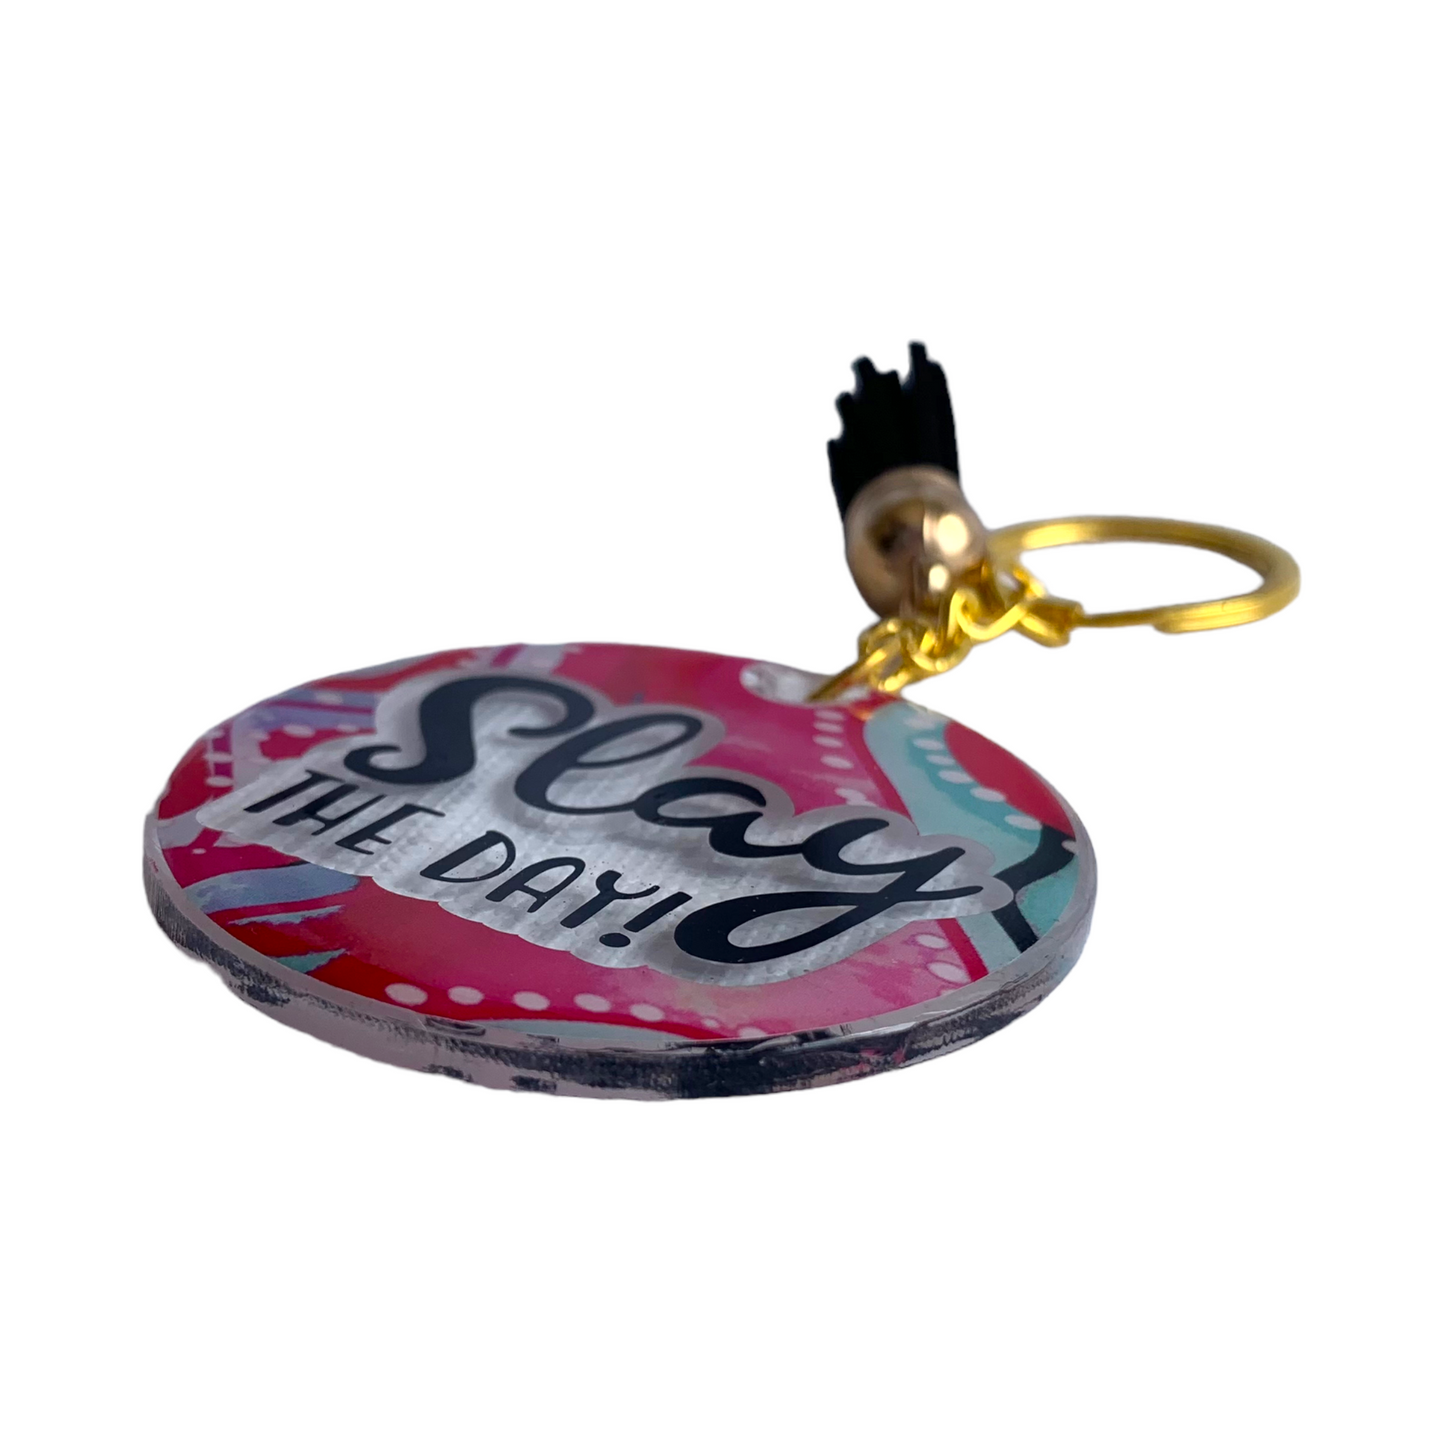 Slay the Day! Pink/Blue Keyring